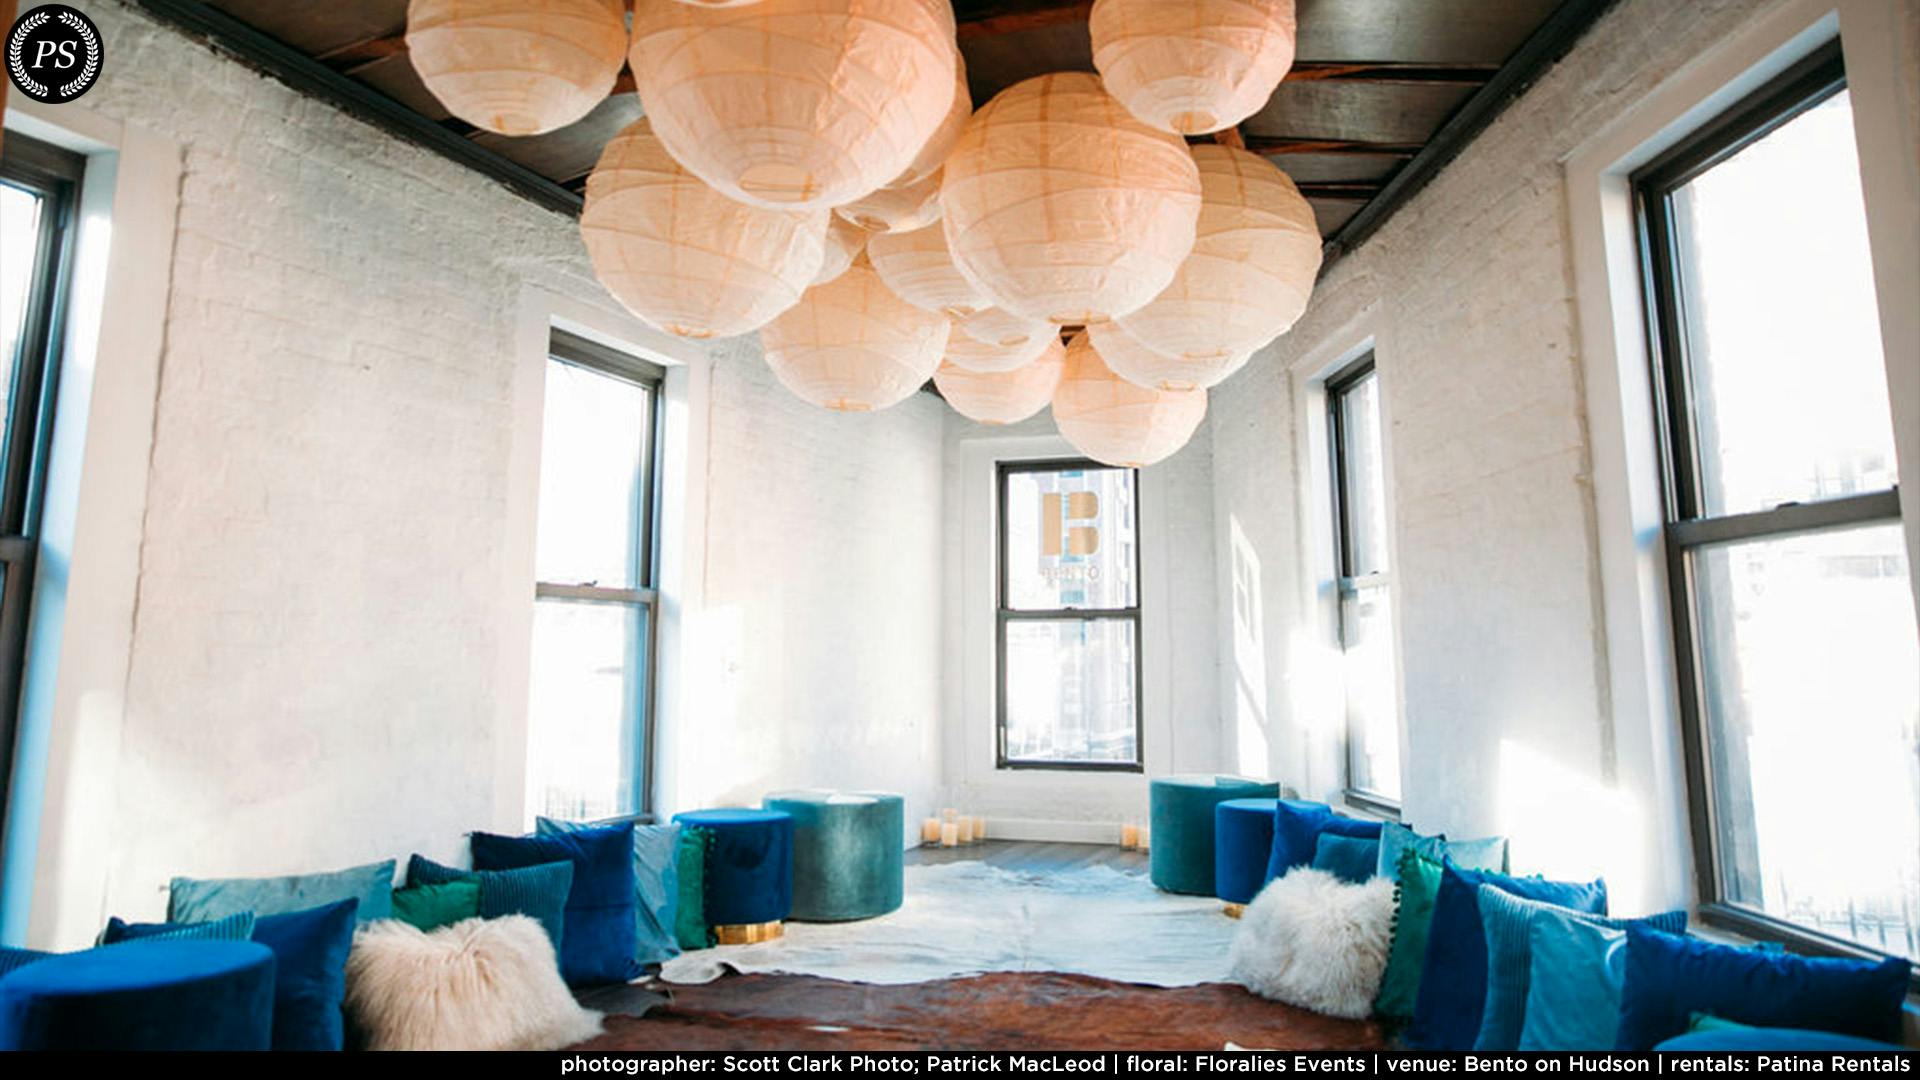 A white walled loft with Chinese lanterns on the ceiling and blue poufs on the floor